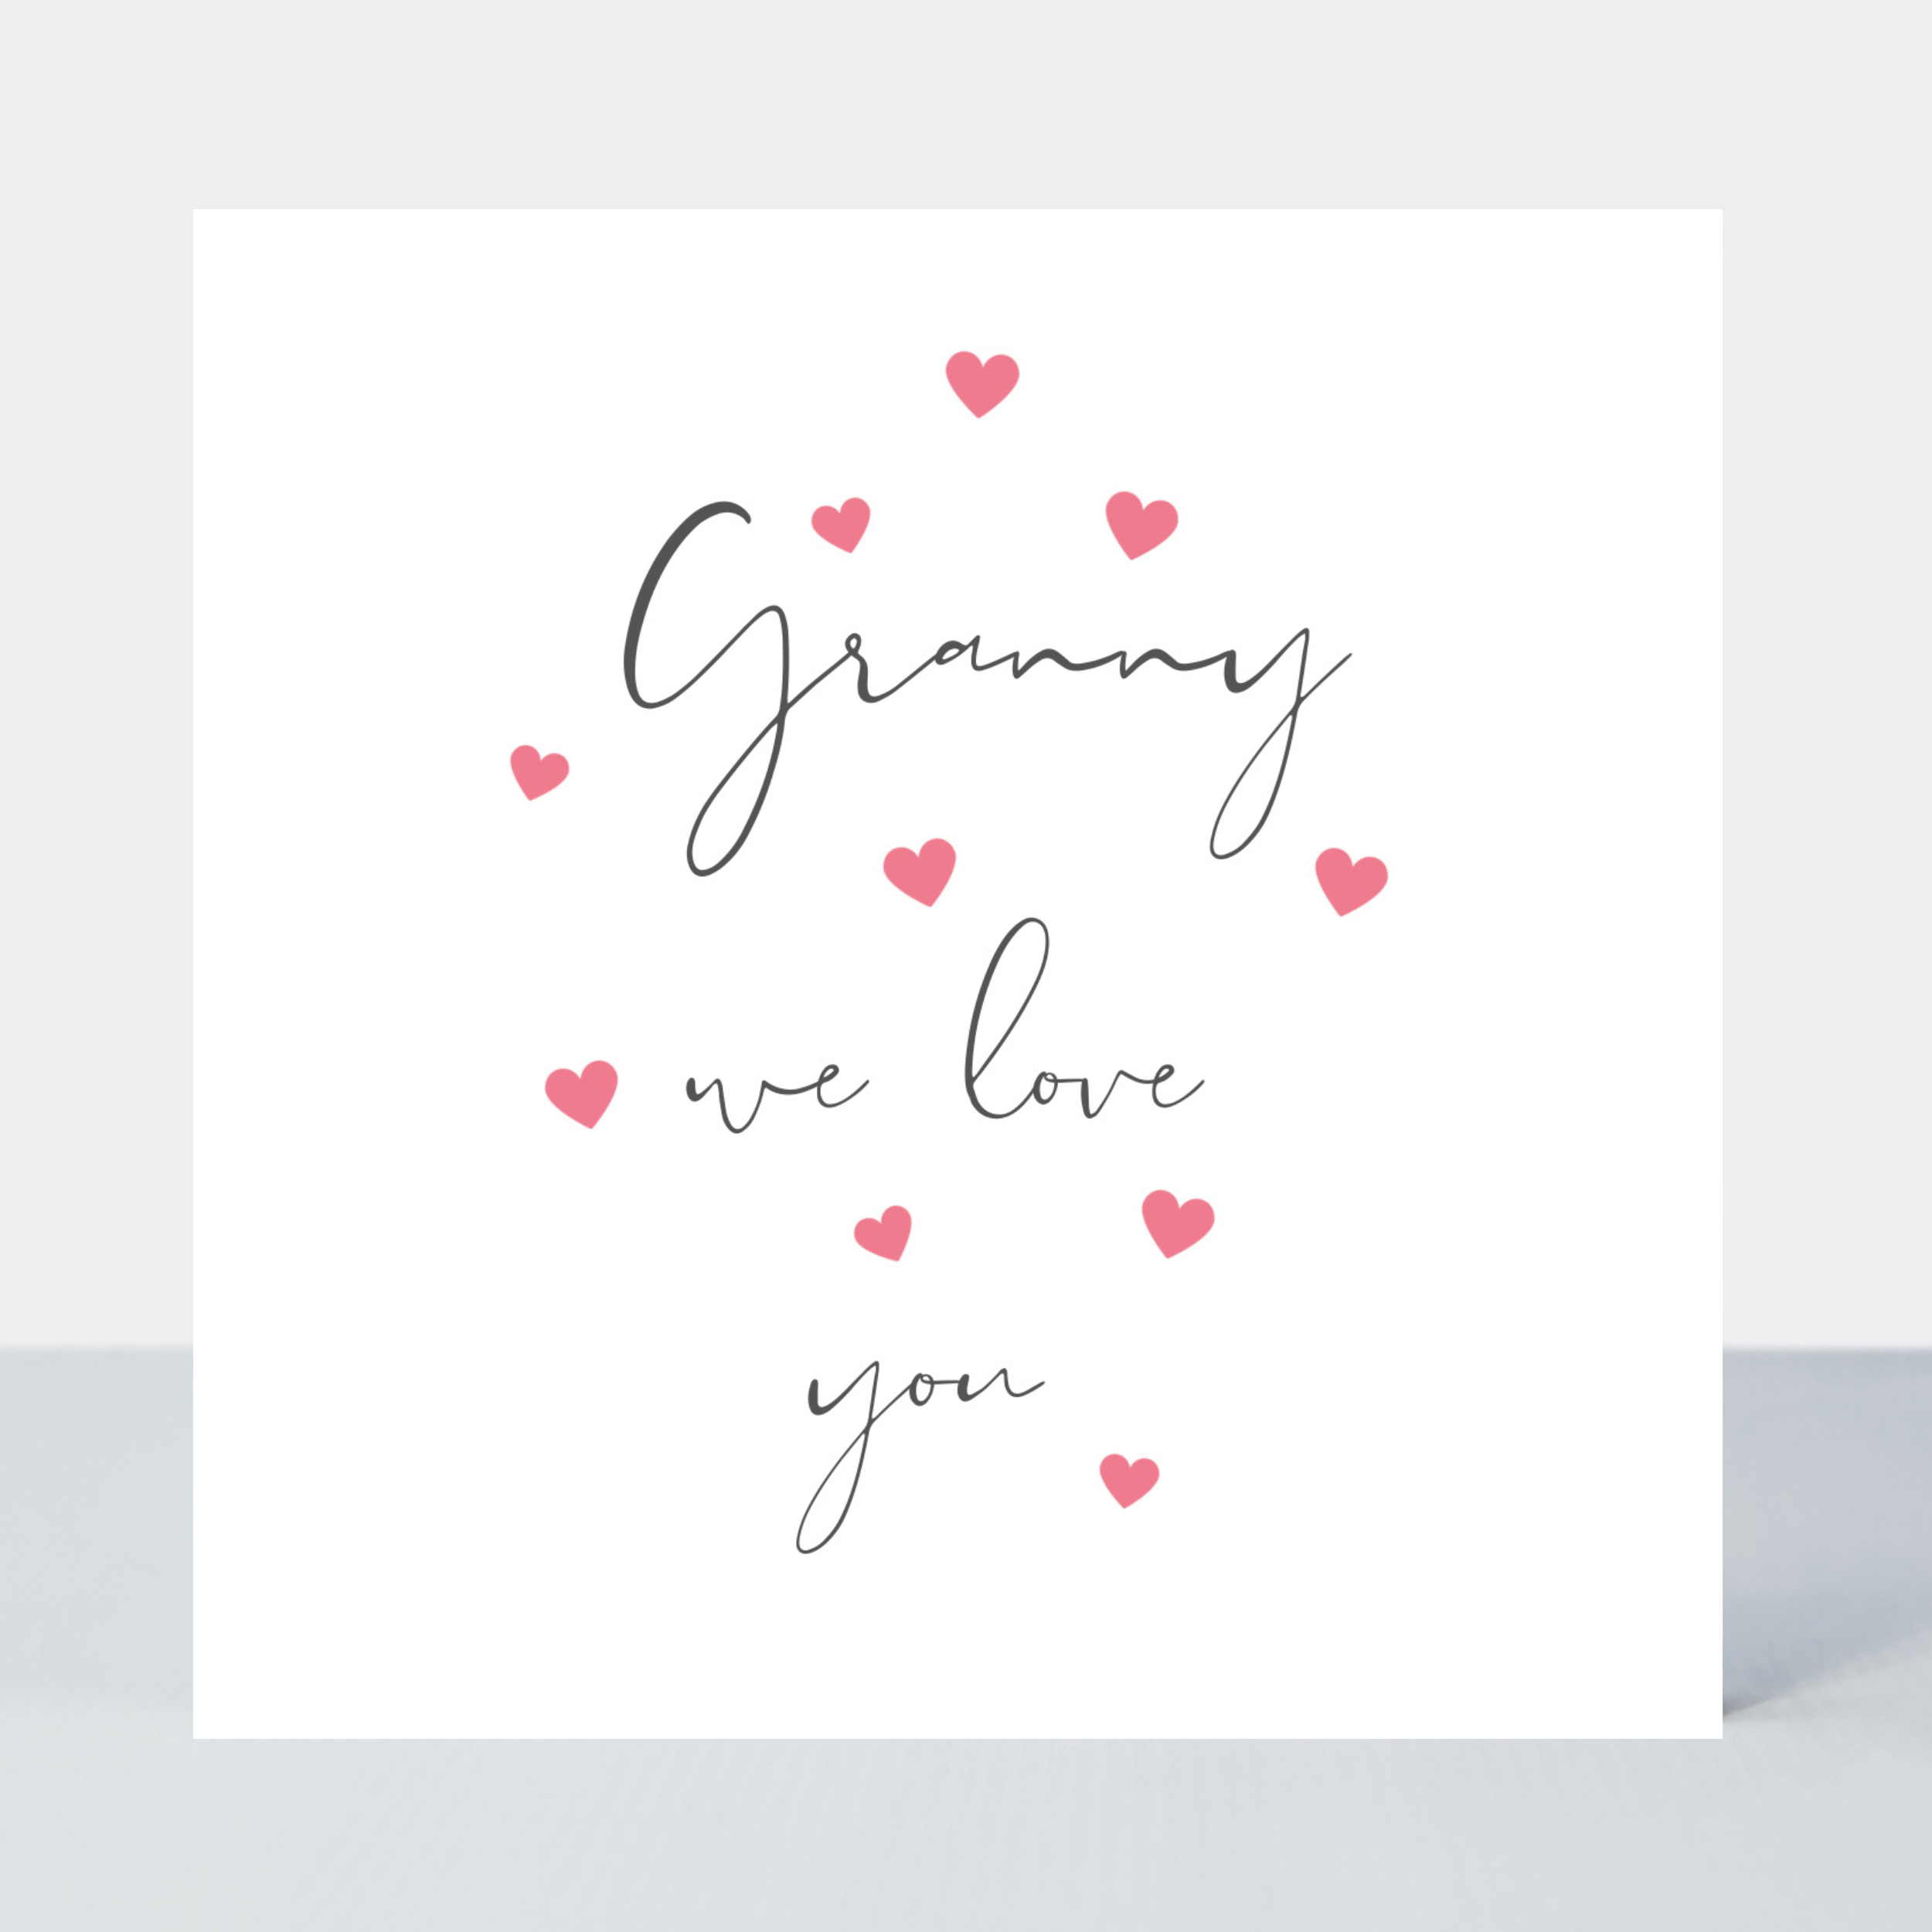 Something Simple Granny Love You Card